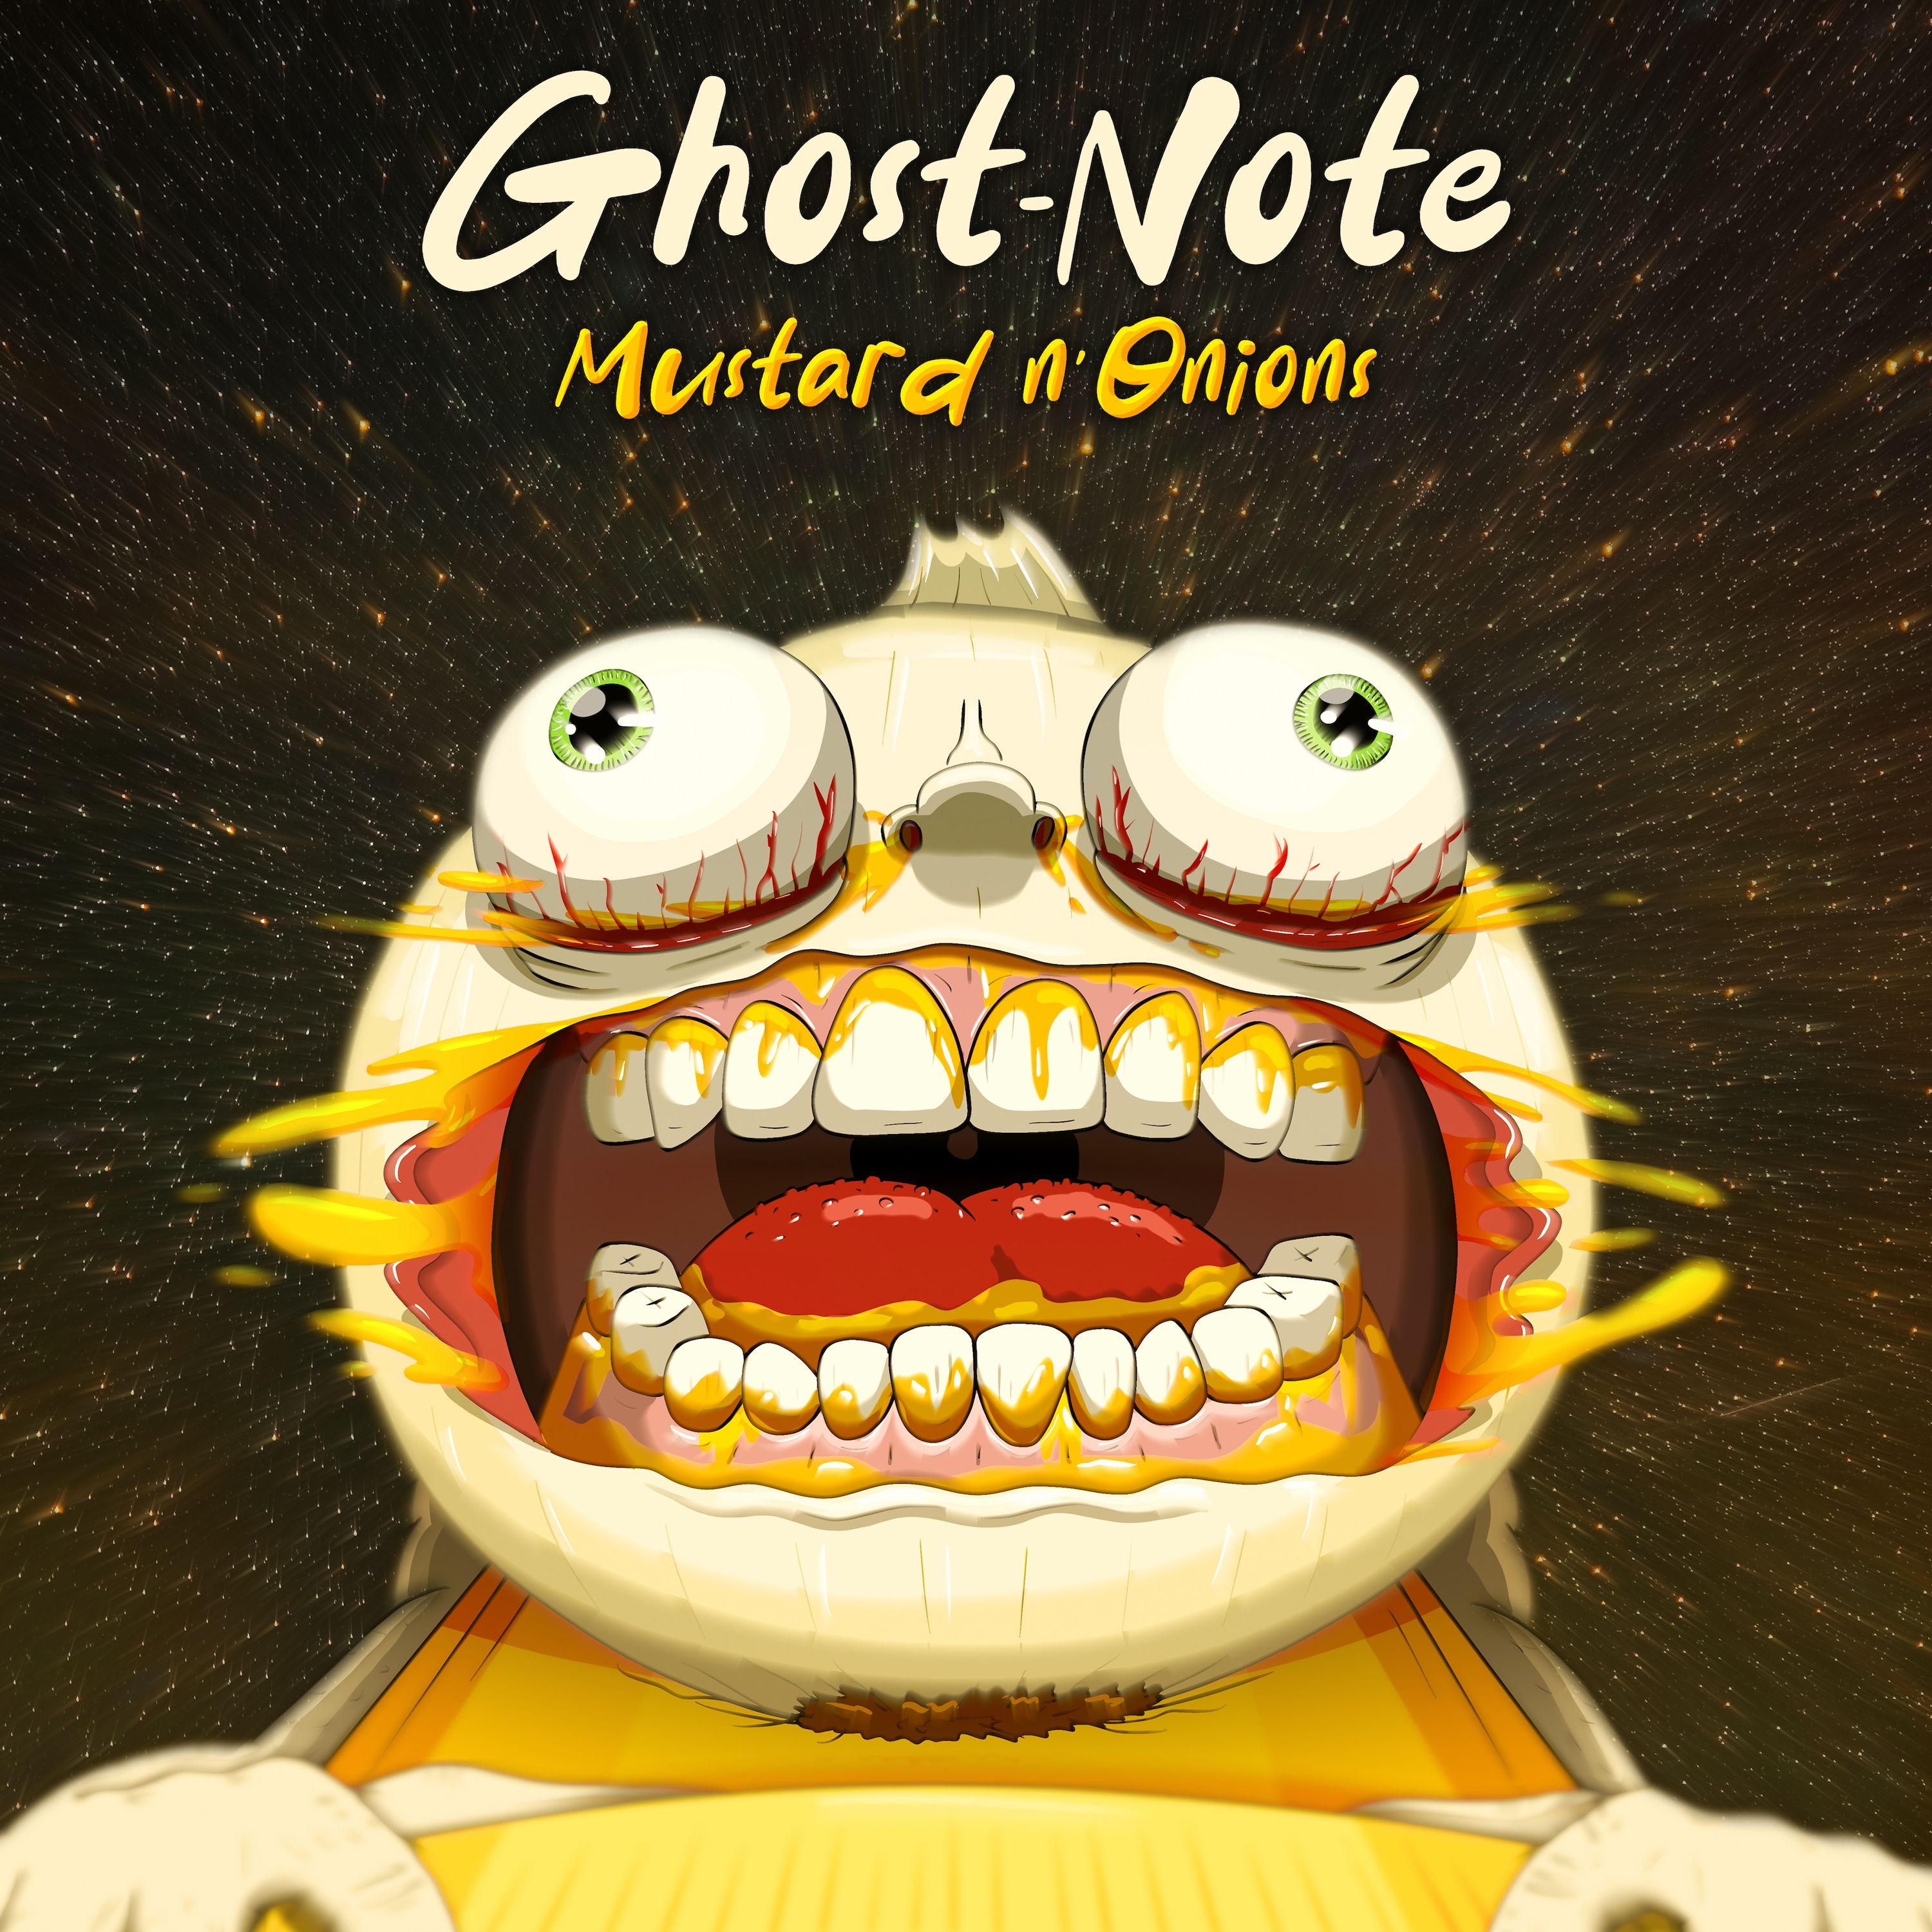 Ghost-Note Releases New Funk Anthem “Where’s Danny?”